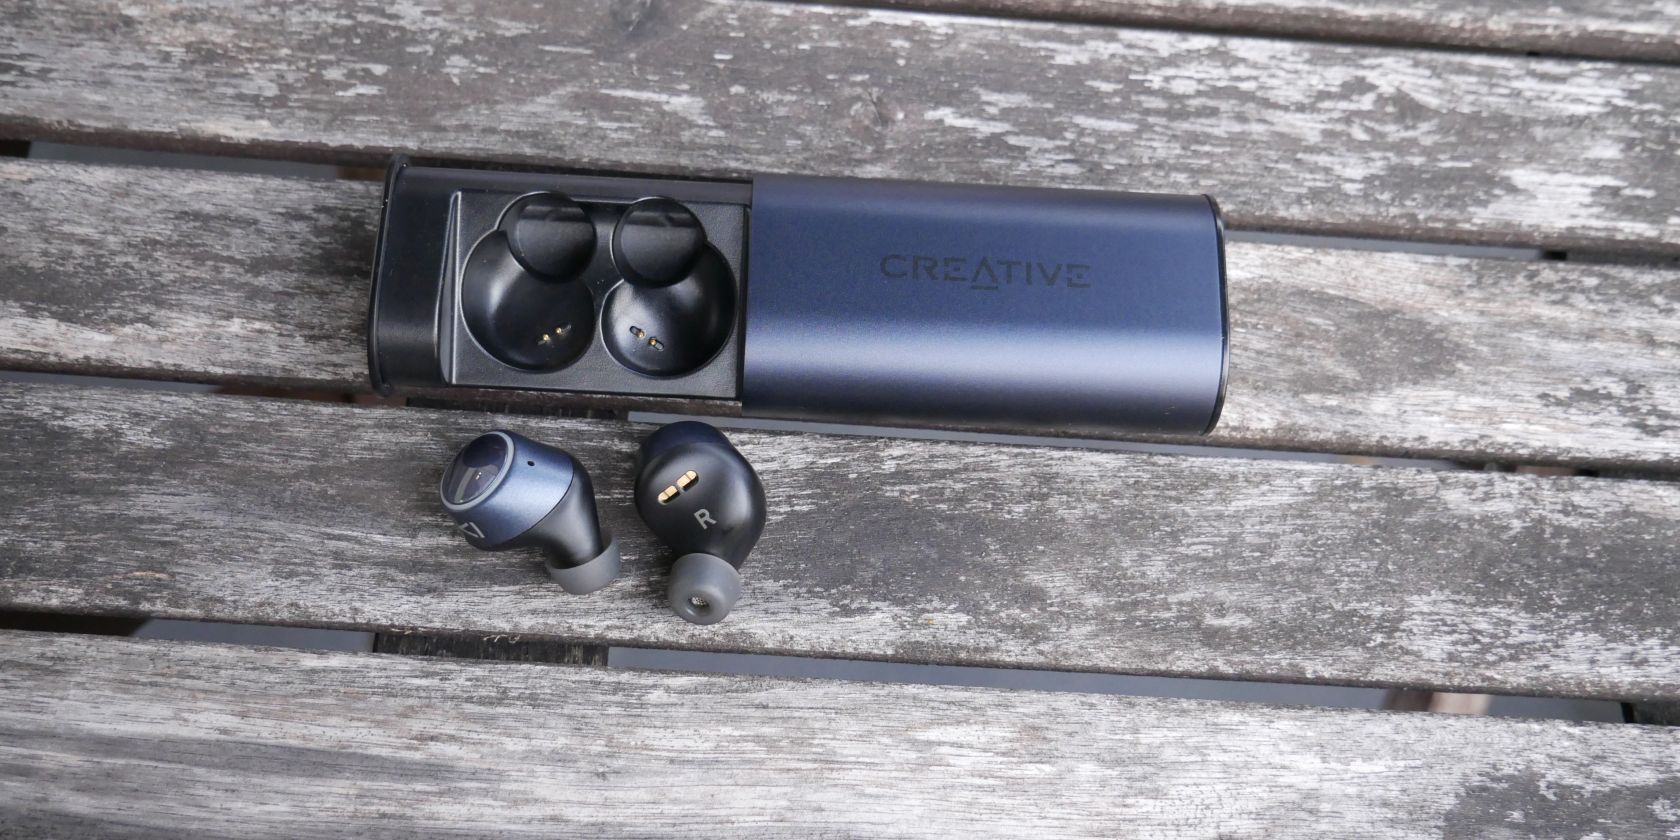 Creative Outlier Air V2 with charging case